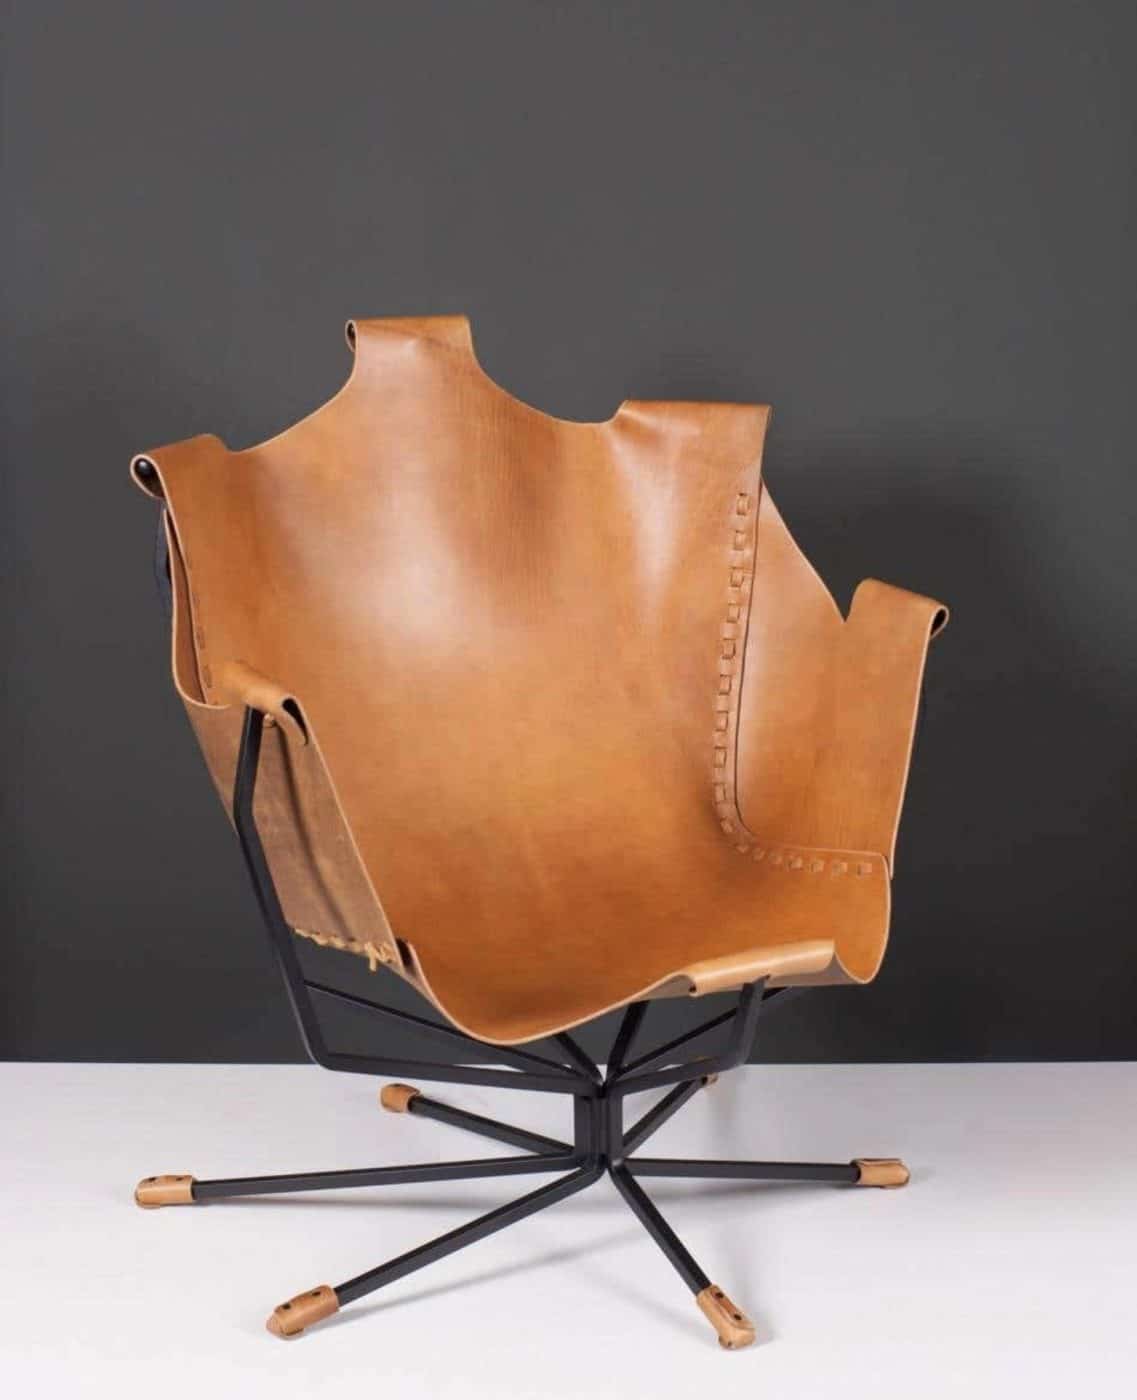 A cognac-colored leather chair with a black steel frame